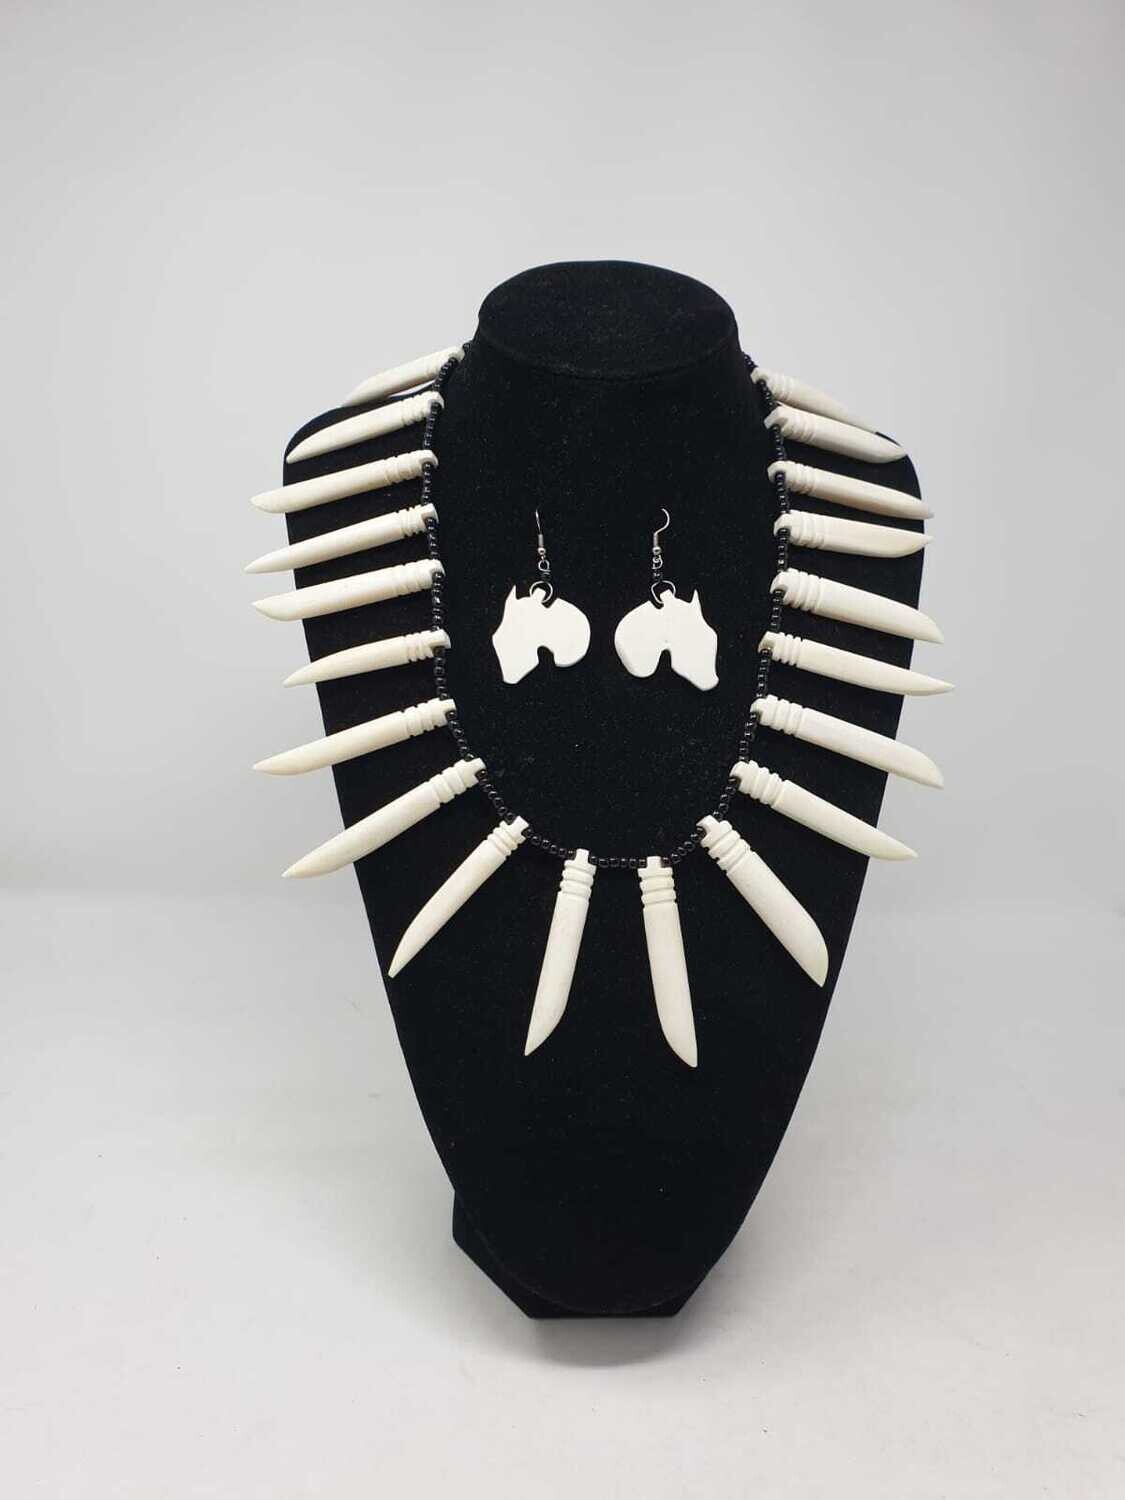 Wakanda Black Panther Styled Necklace with Matching Earrings - White